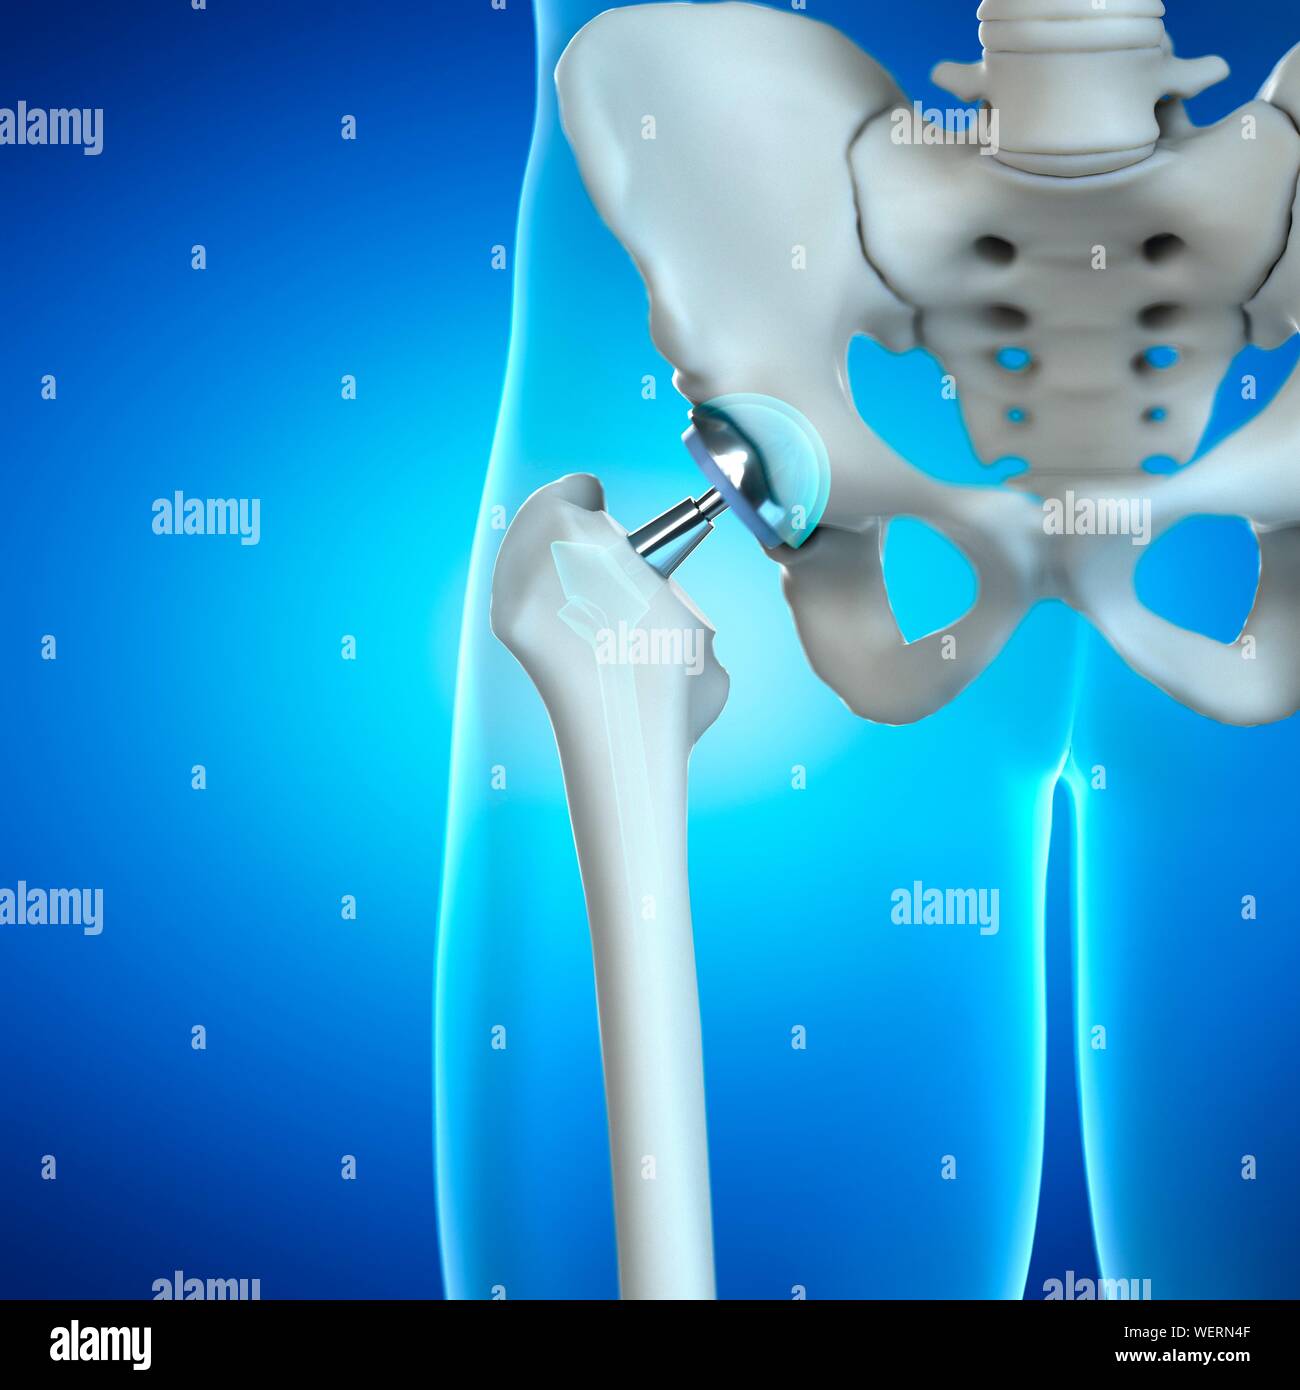 Hip replacement, illustration Stock Photo